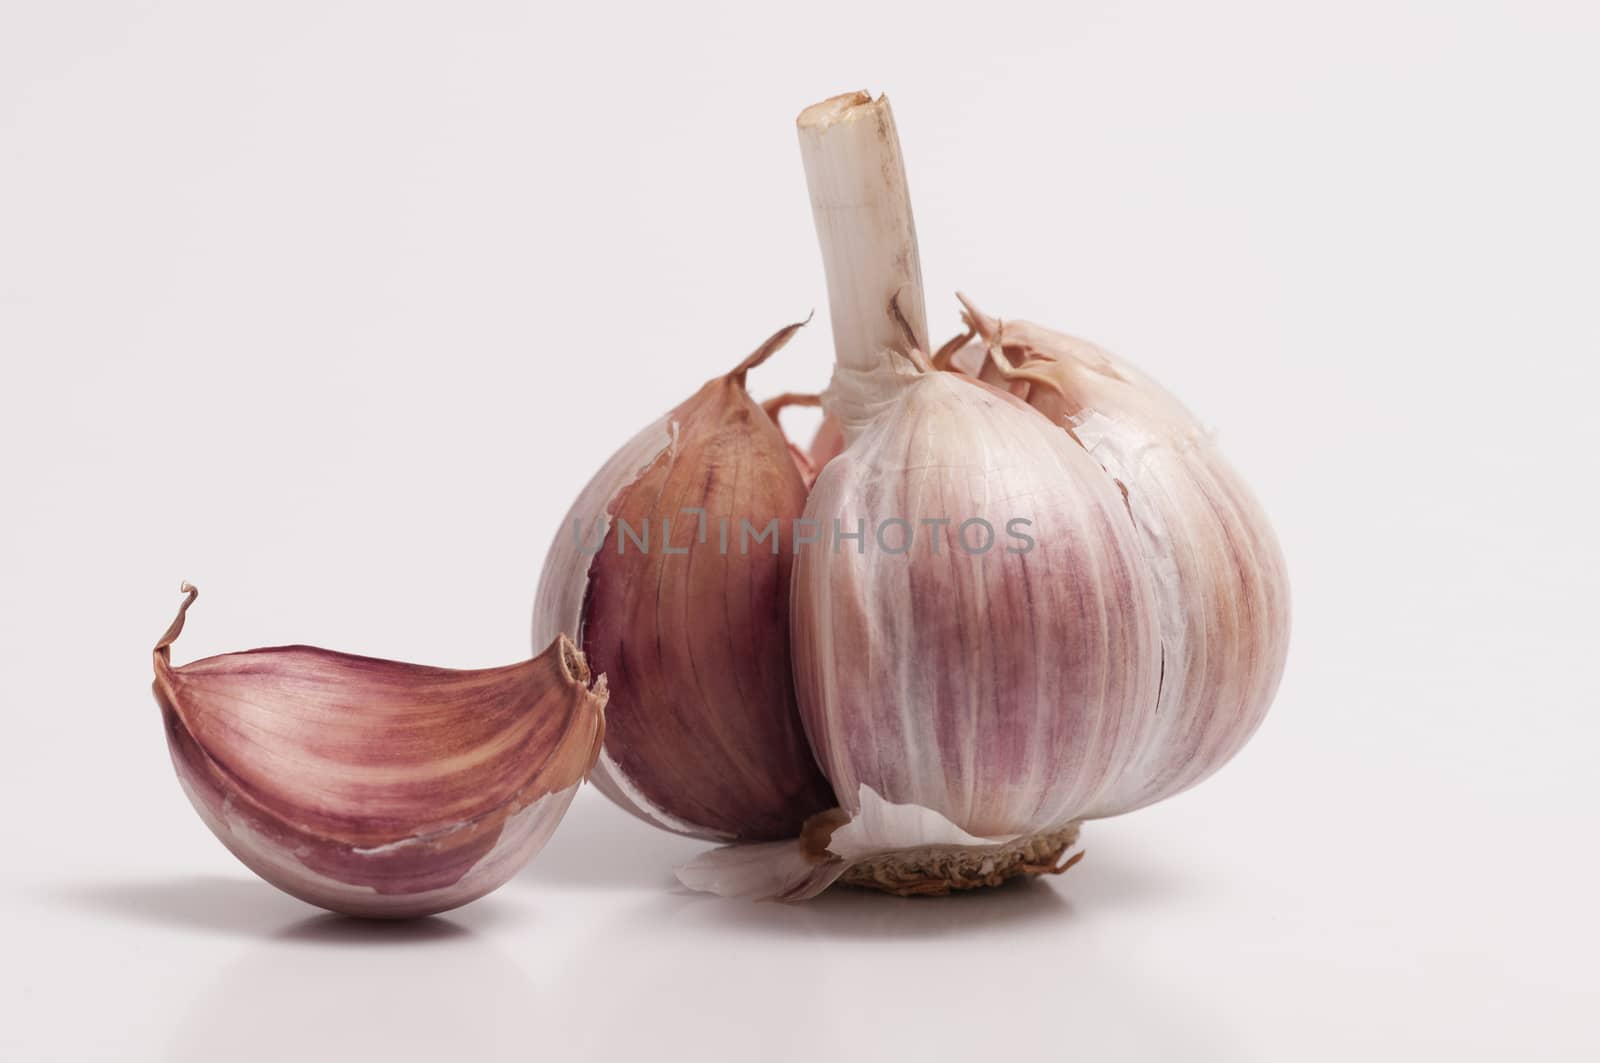 A garlic bulb and a individual clove isolated on white background